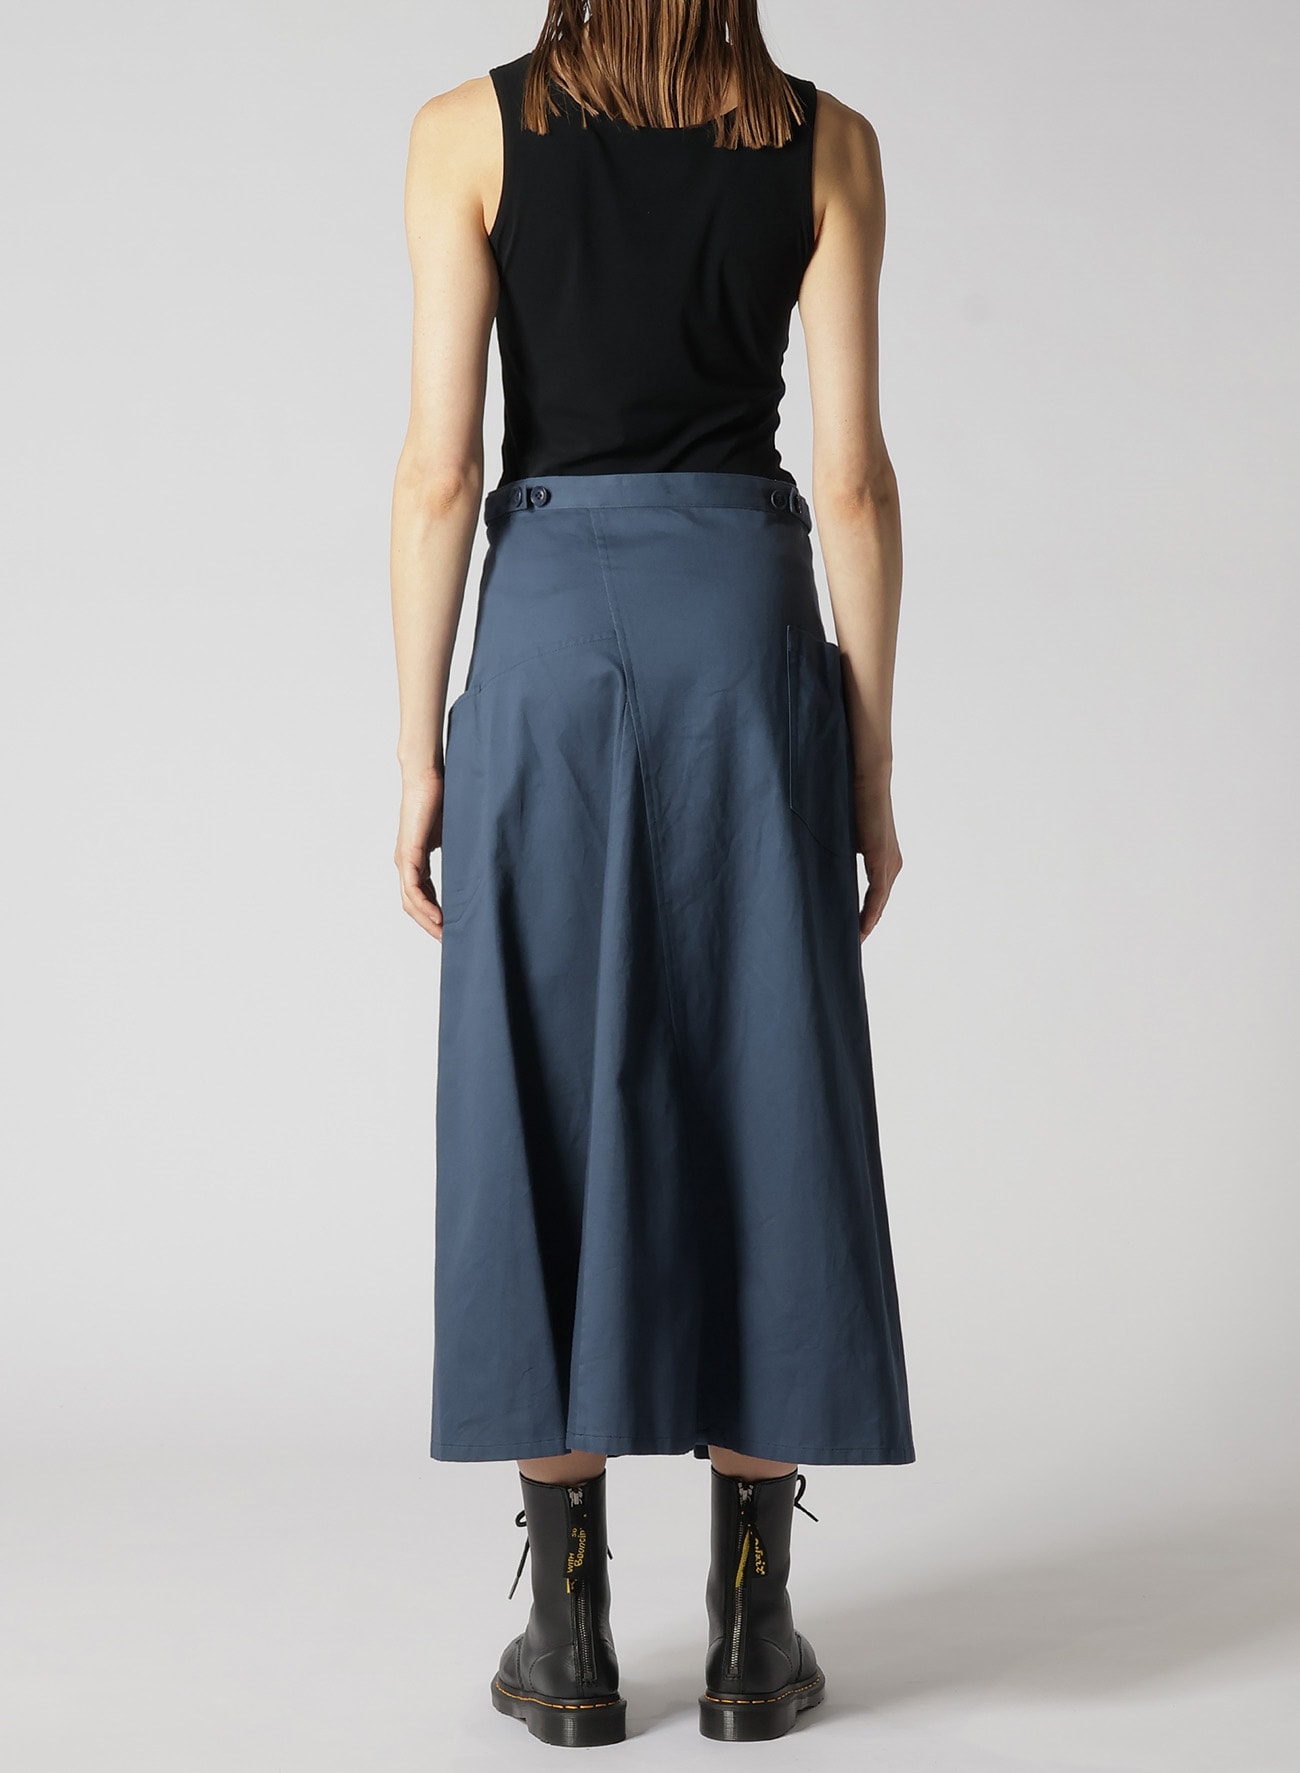 [Y's BORN PRODUCT] COTTON TWILL FLARE GUSSET FLARE SKIRT